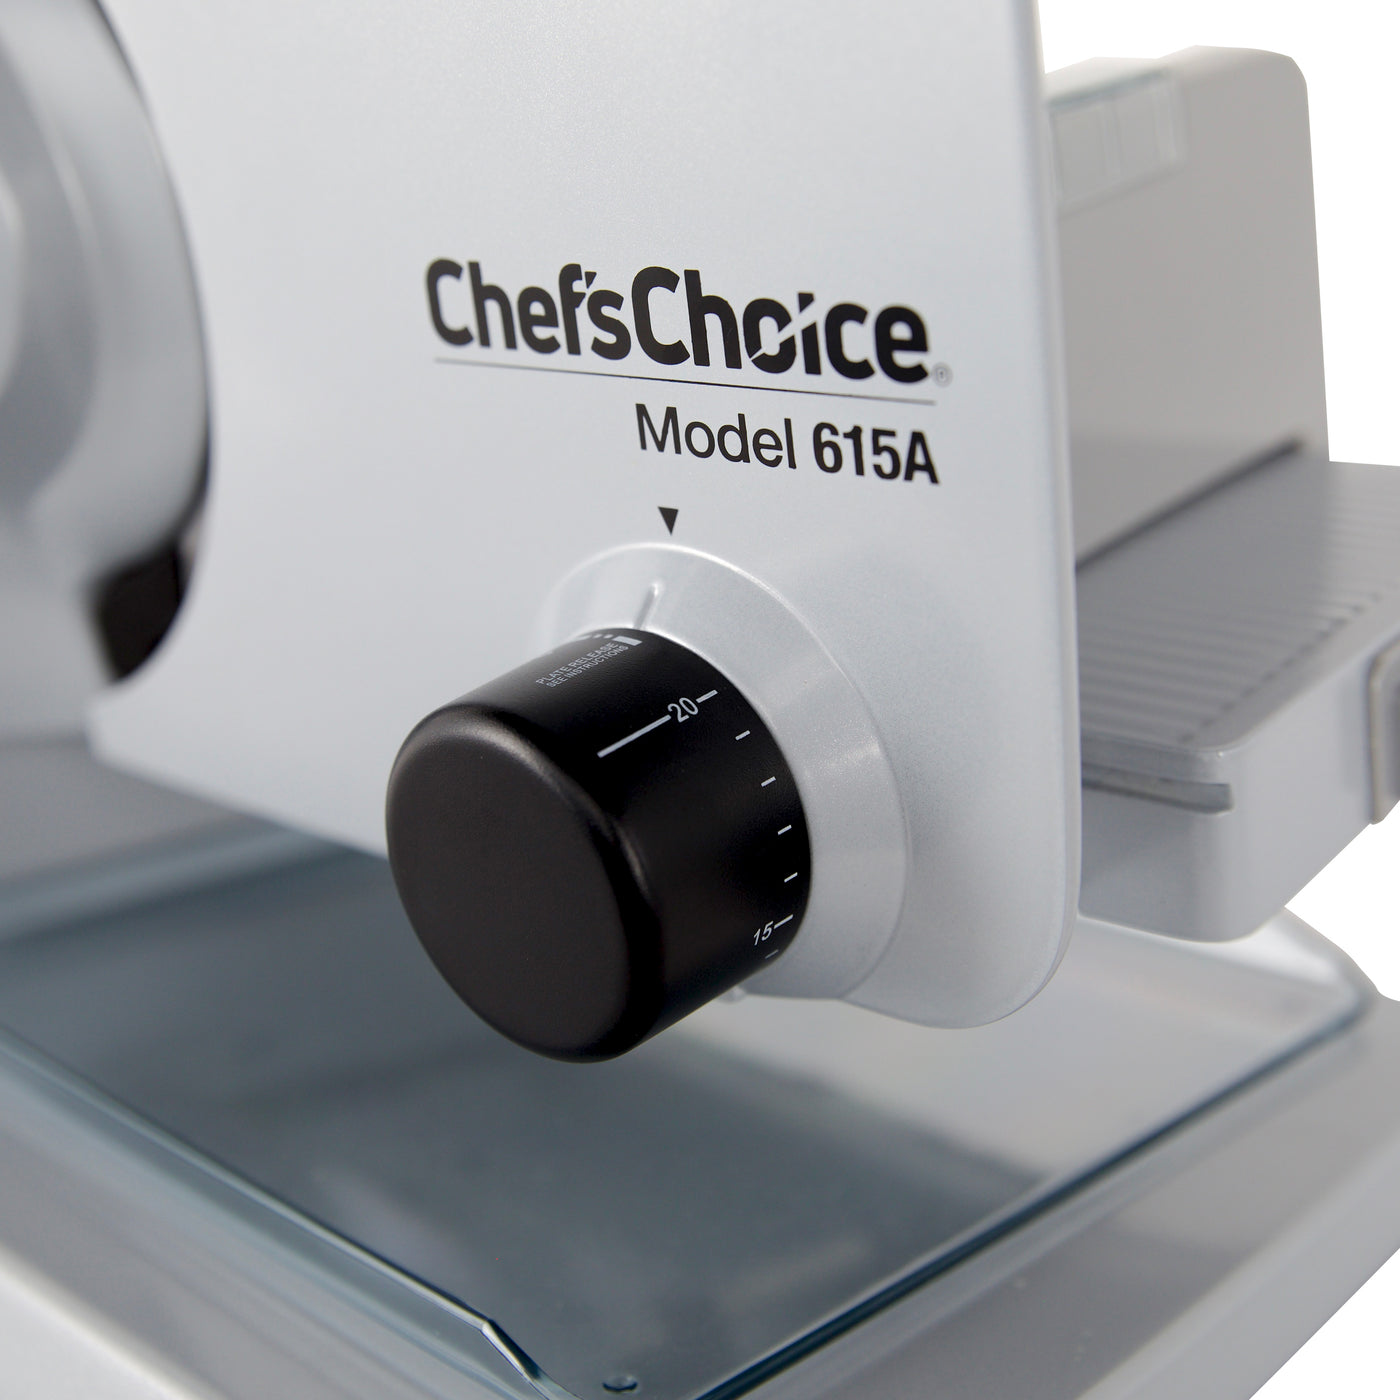 5 Best Electric Meat Slicer for Home Use 